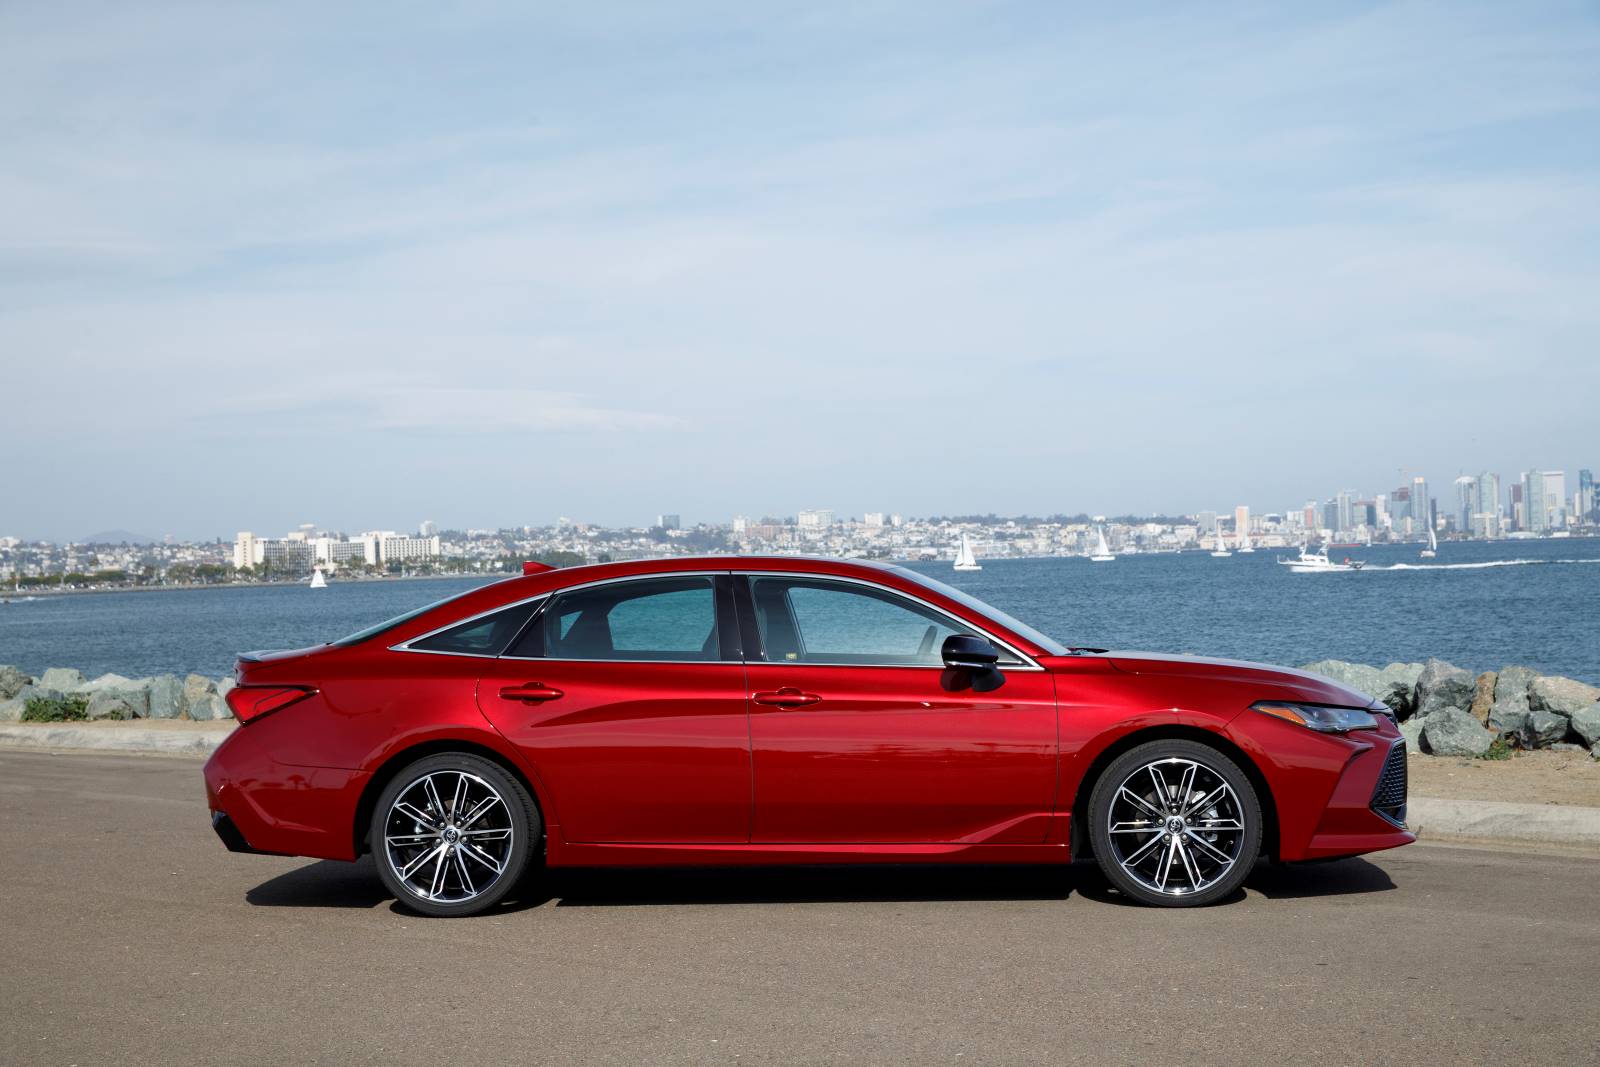 Side profile of a red 2022 Toyota Avalon, a very reliable car for Uber or Lyft driving